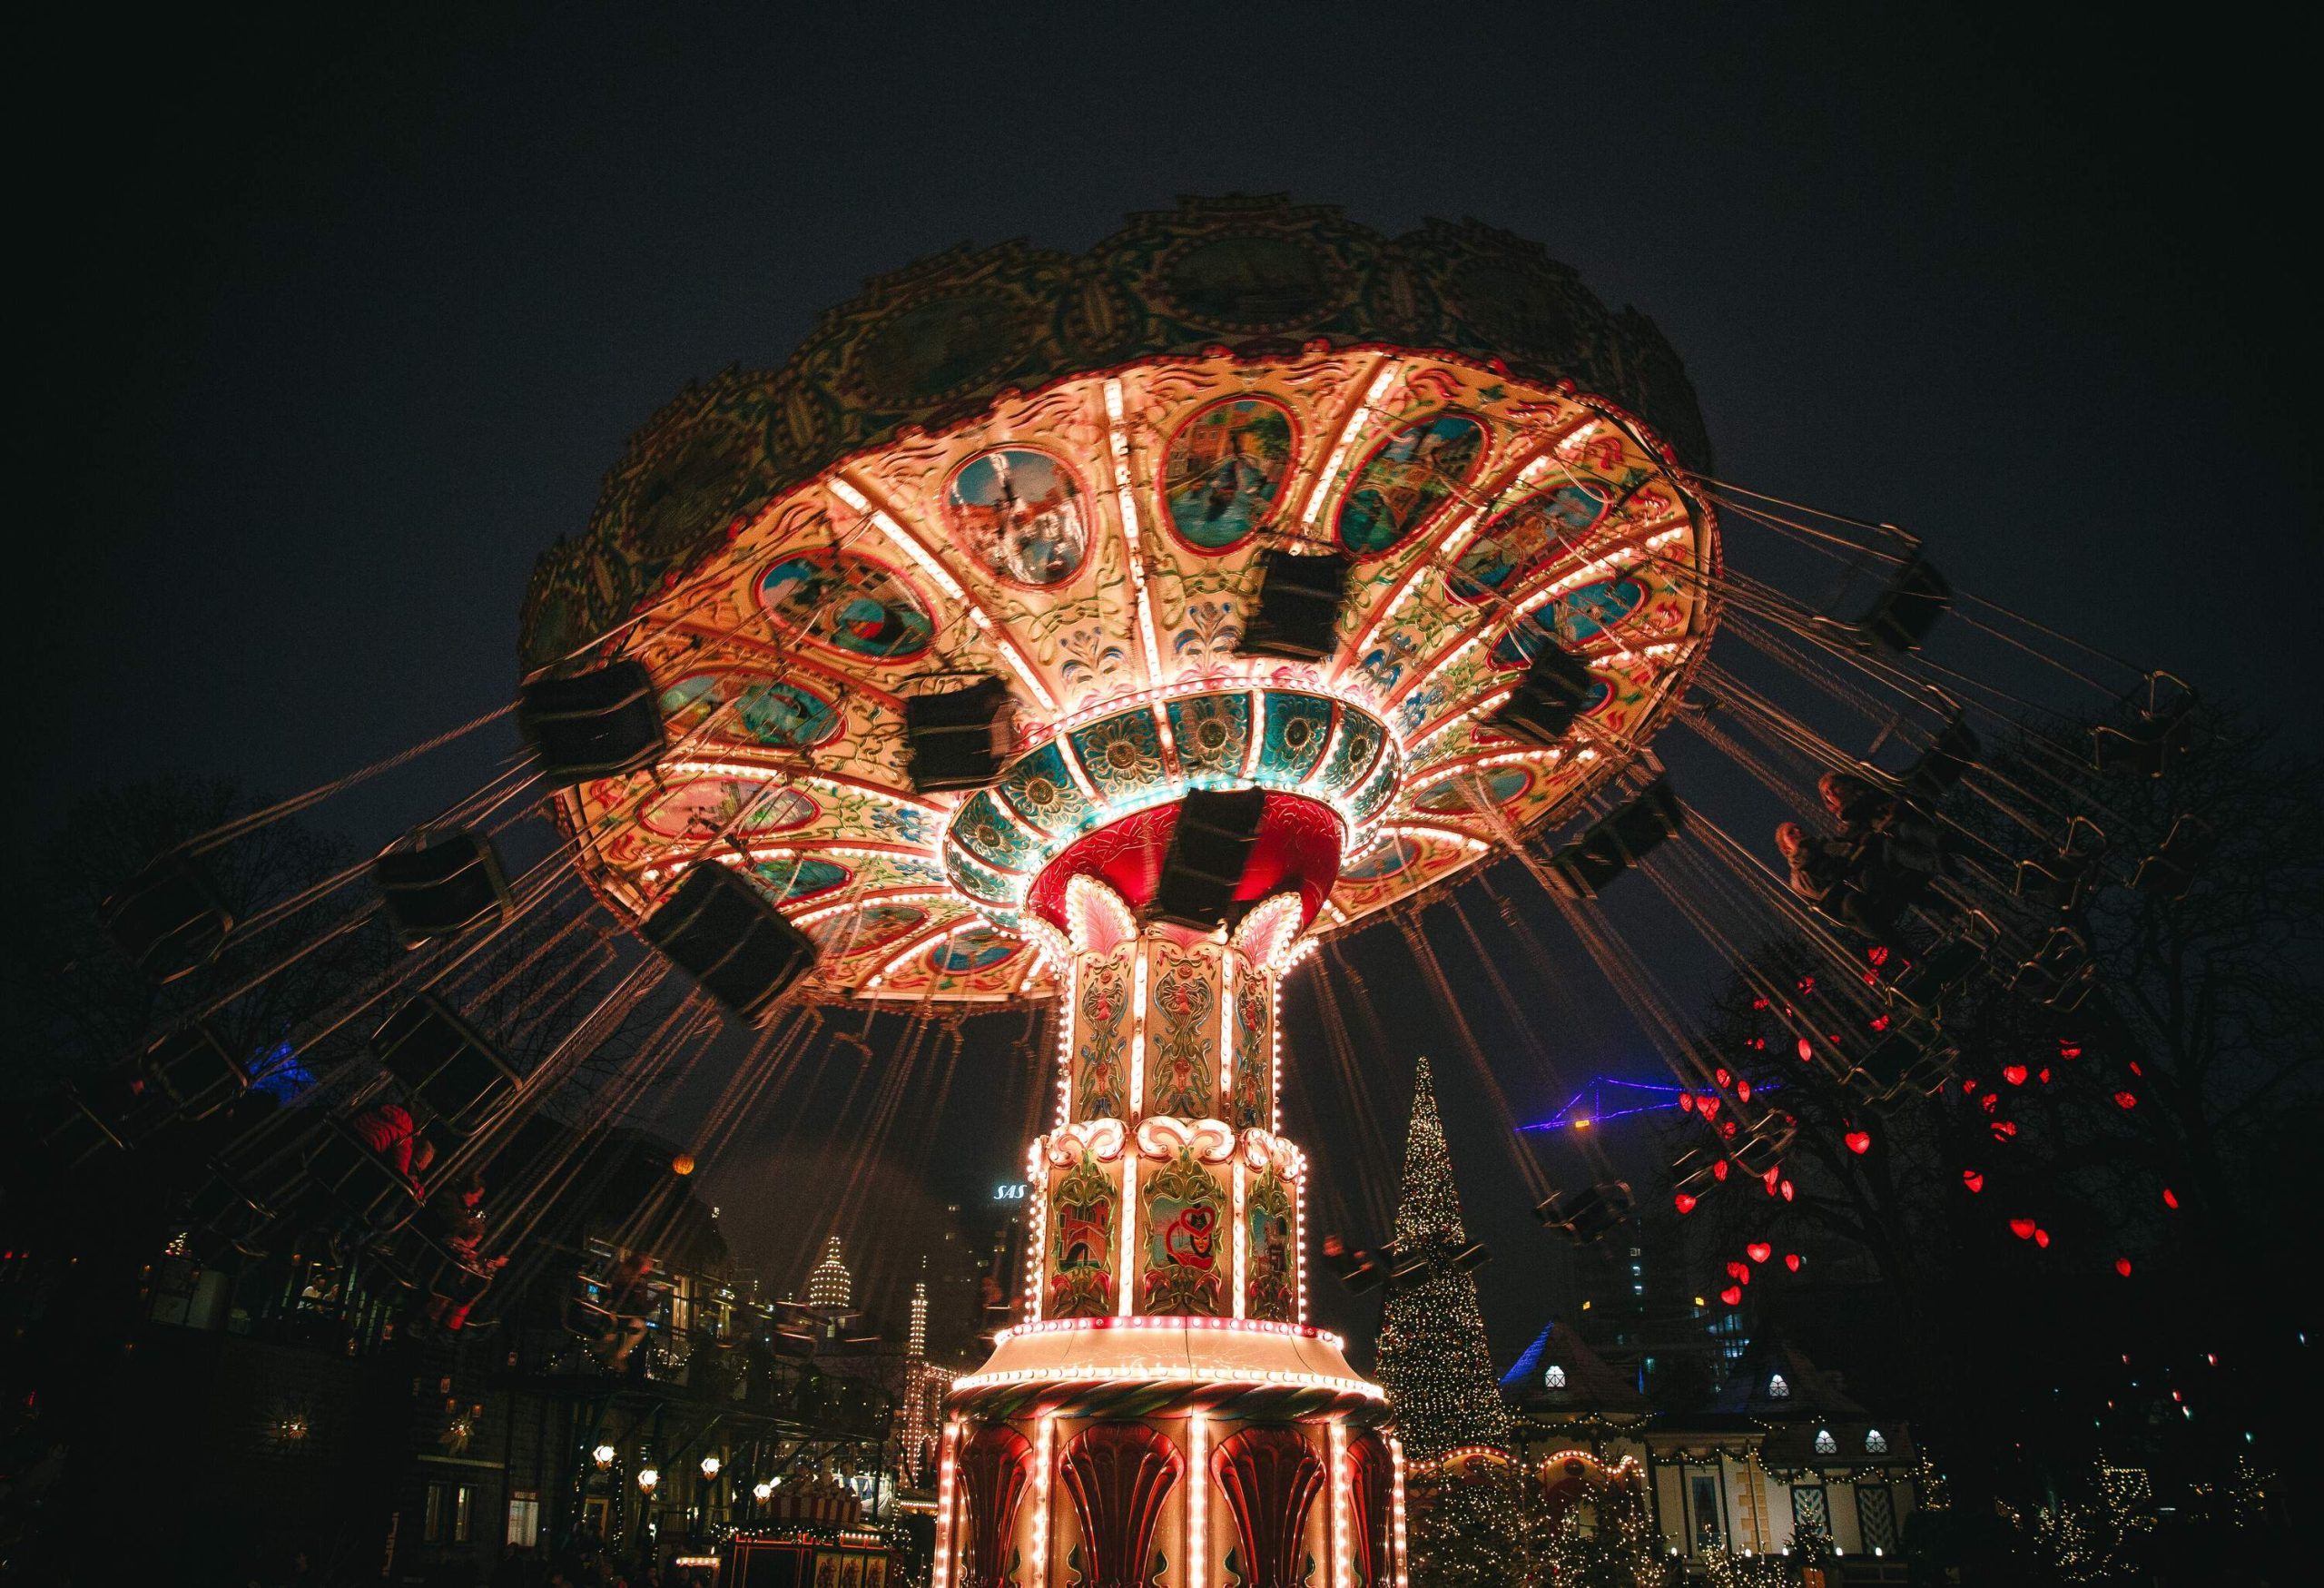 A night-time view of a bright and spinning swing carousel.